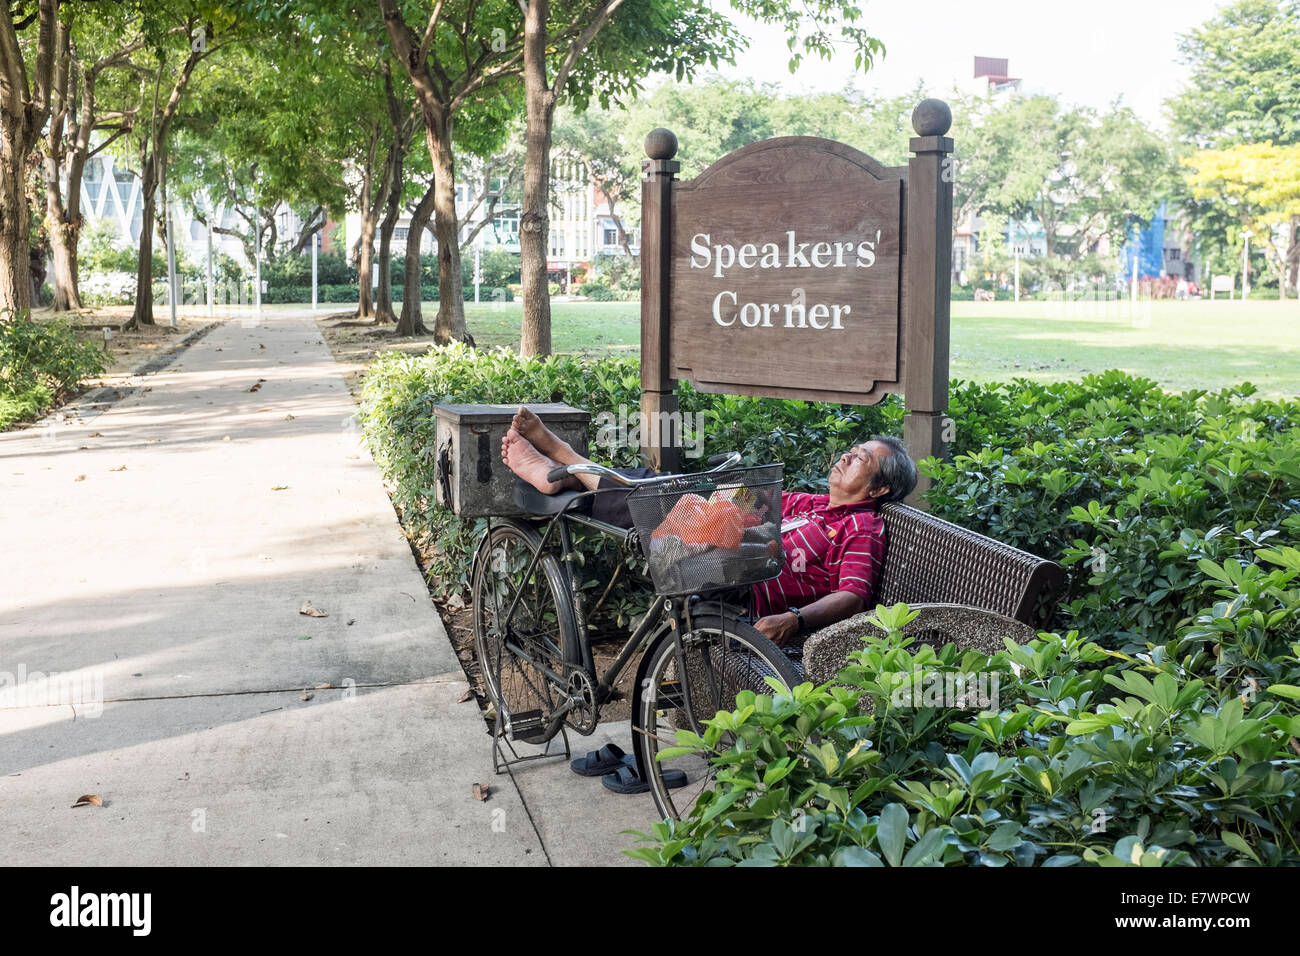 An elderly man takes a nap at the entrance to Speakers' Corner in Singapore Stock Photo